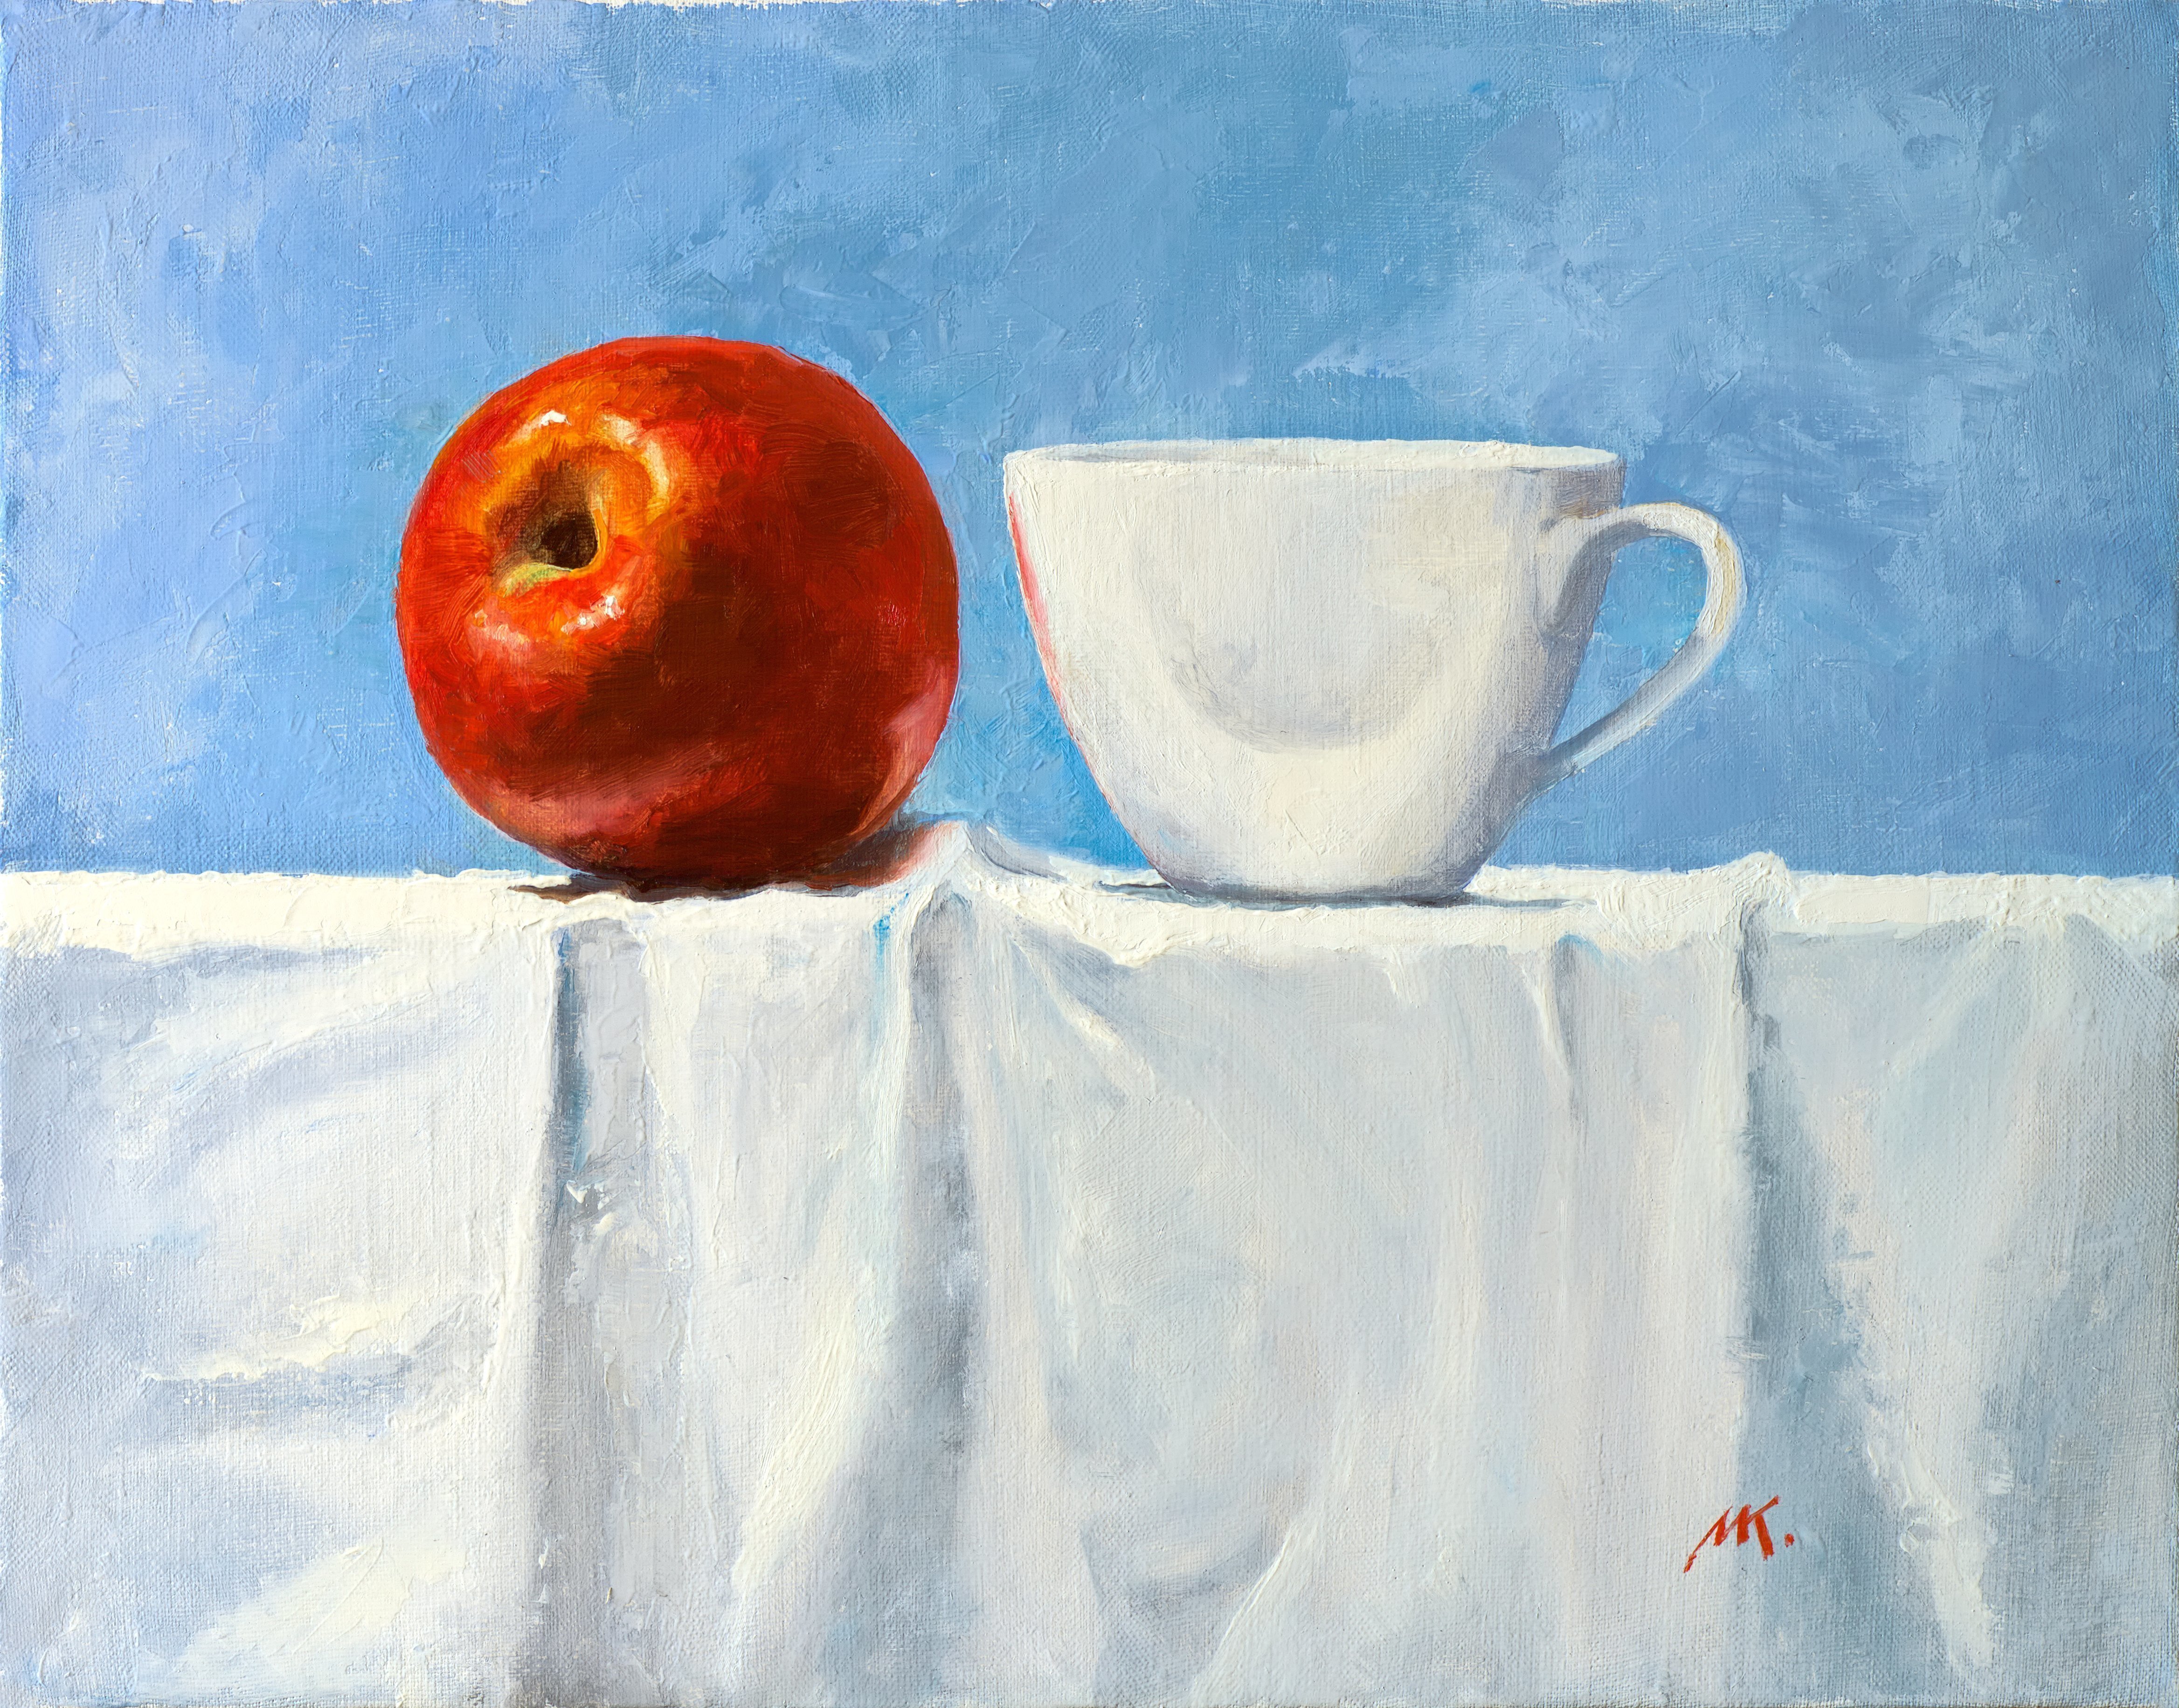 Mikhail Velavok; Red White, 2017, Original Painting Oil, 17.5 x 13.5 inches. Artwork description: 241 Original oil painting on canvas. The work is being sold unframed. The frame in the additional photo is an example only.still life, apple, red apple, cup, white cup, red, white, wrinkle, fold, fabric, white fabric, tablecloth...